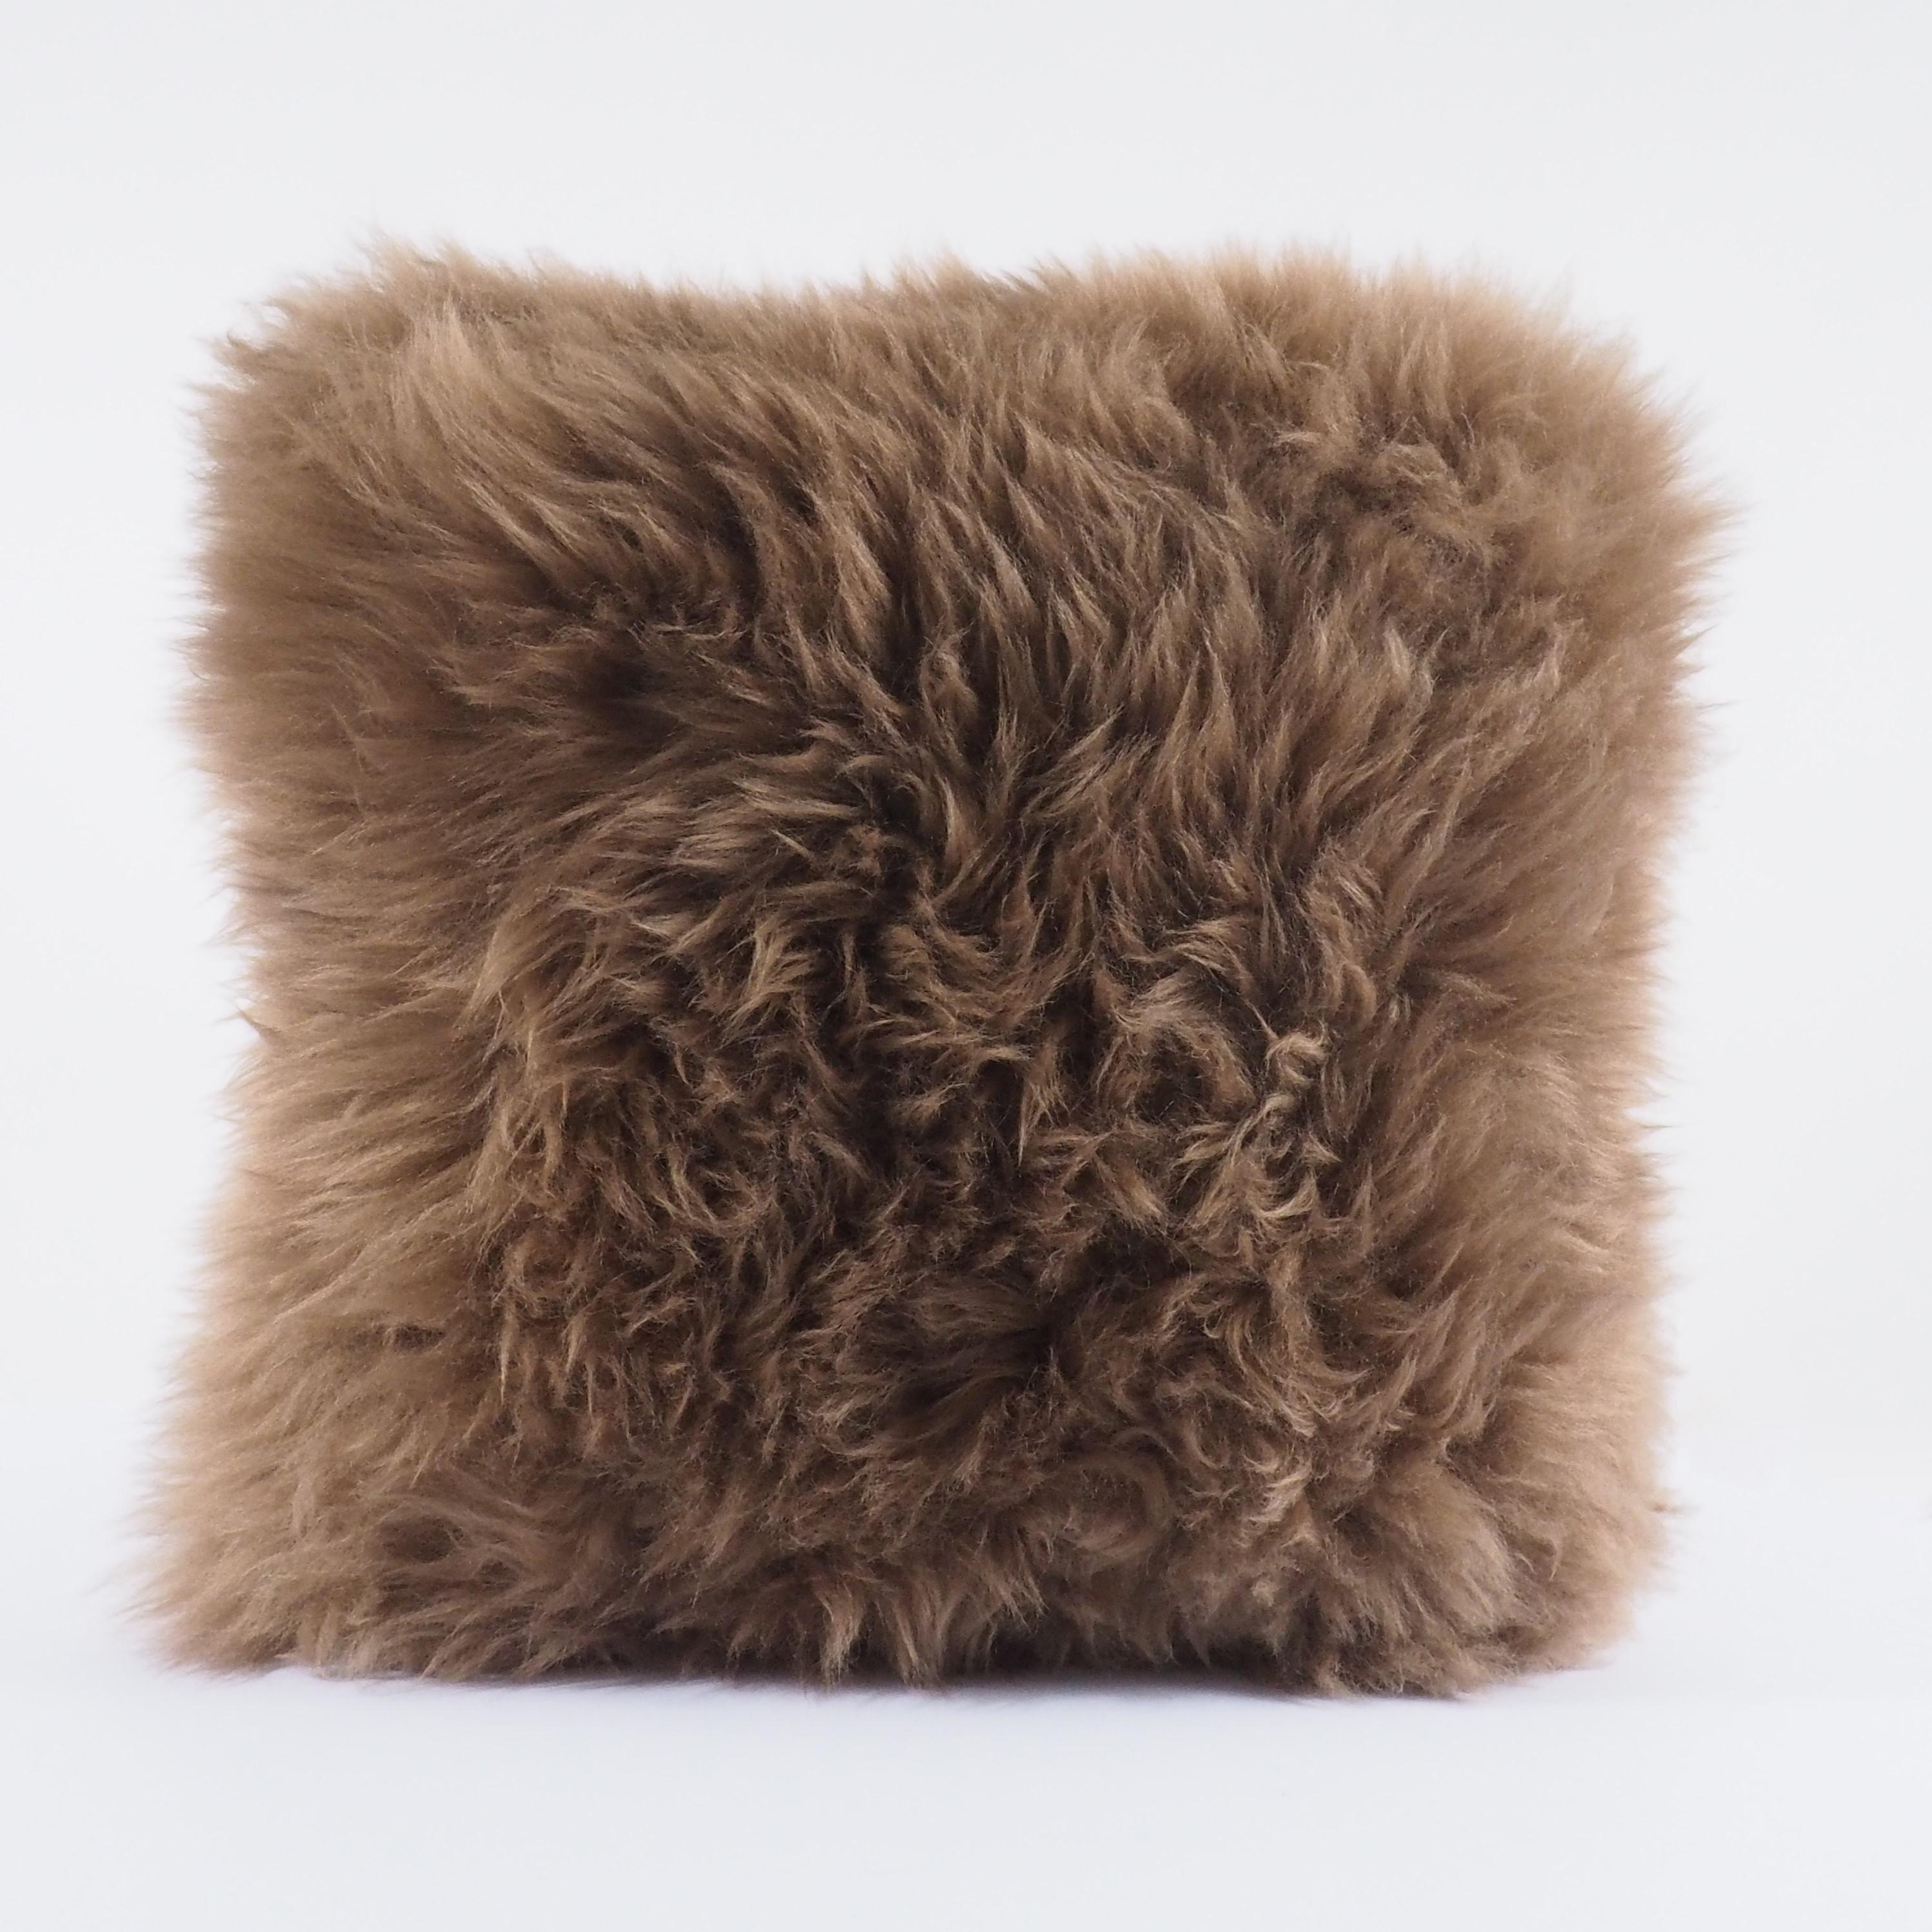 Coffee Bean Dark Camel Shearling Sheepskin Pillow Fluffy Cushion by Muchi Decor In New Condition For Sale In Poviglio, IT